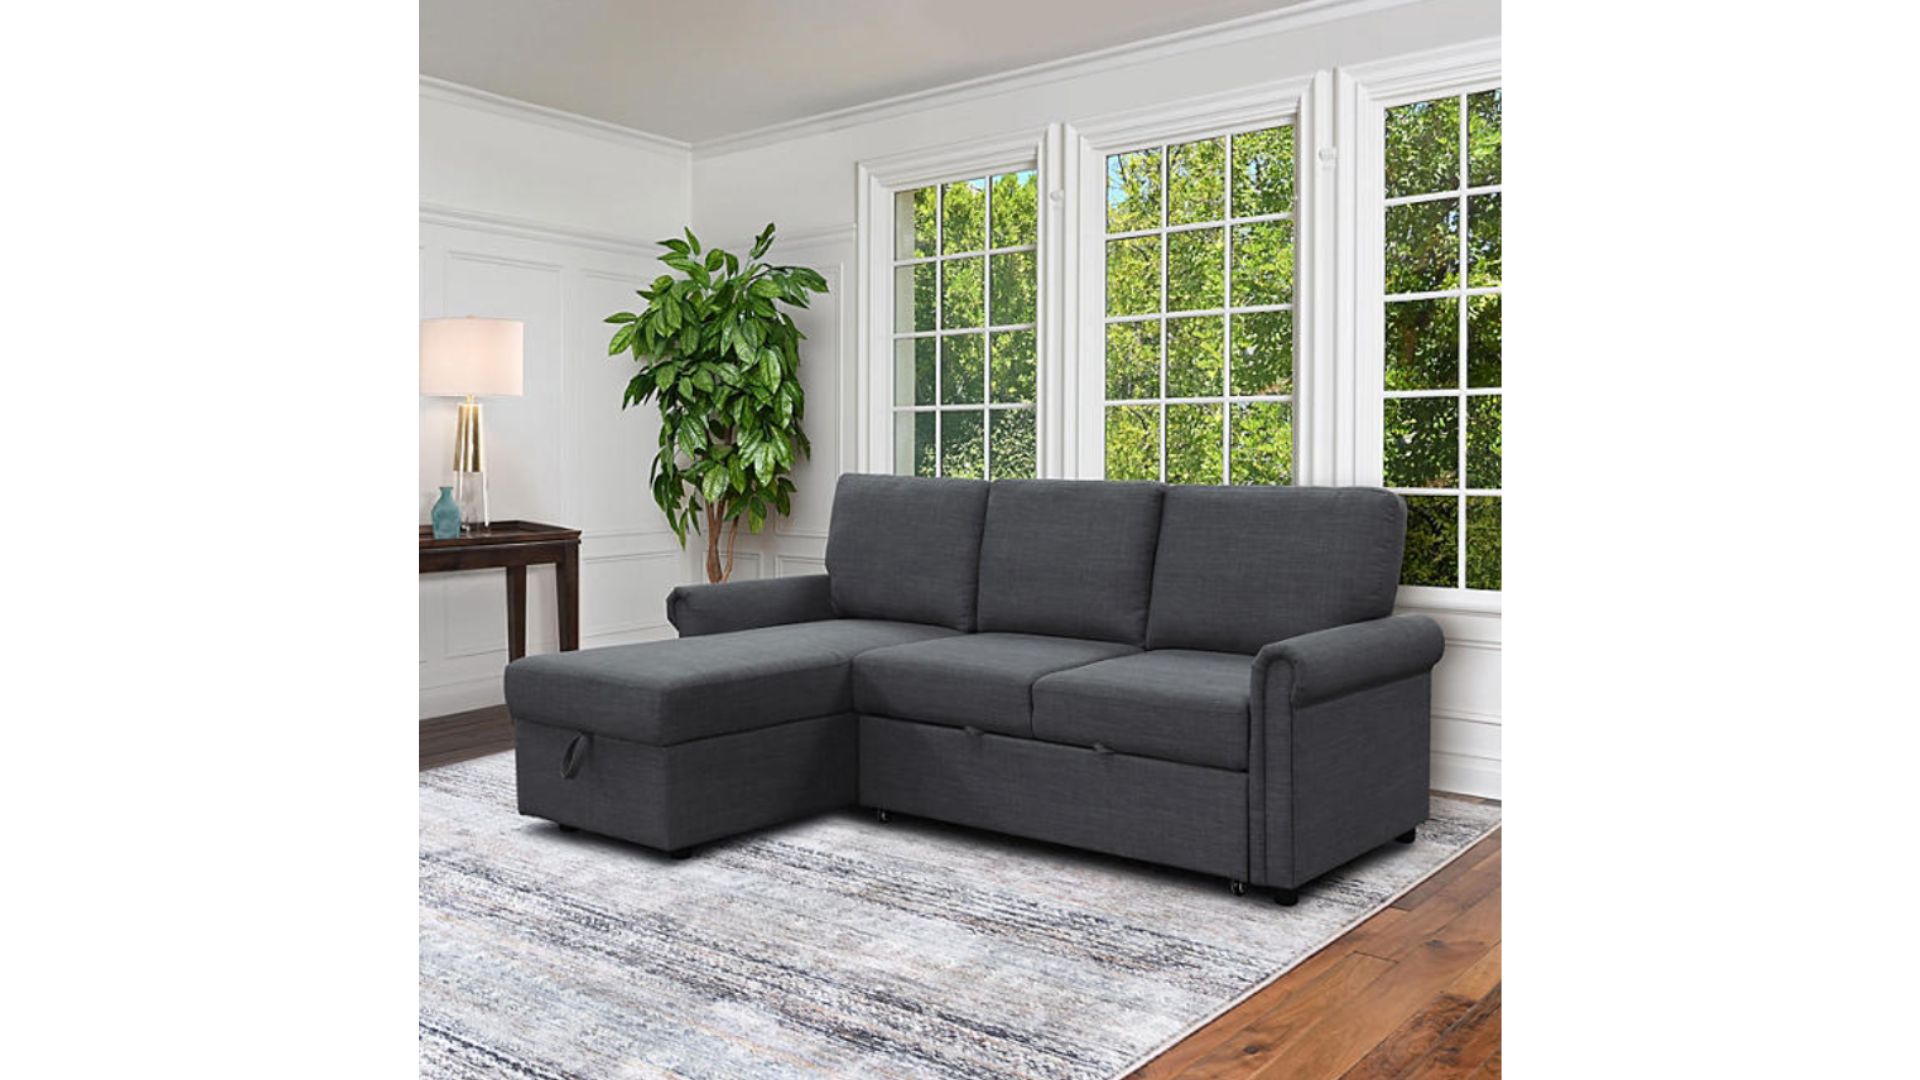 <ul> <li><strong>Price:</strong> <a href="https://www.samsclub.com/p/hamilton-fabric-reversible-storage-sectional-sofa-pullout-bed/prod24640916" rel="noreferrer noopener">$699.00</a></li> </ul> <p>The second piece of furniture on this roundup is the Hamilton reversible storage sectional with a pullout bed. Currently, the sectional holds a 3.9 rating on the Sam's Club website with 120 one-star reviews.</p> <p>One reviewer known as KT wrote a critical review of the sectional. Complaints included the sectional arriving late to their residence and the pullout bed collapsing along with struggling to communicate with both Sam's Club and the warranty provider, Abbyson.</p> <p>"I purchased this couch in Nov 2020 and it didn't arrive until Dec 2020. The pullout couch/bed portion collapses. I completed all the necessary measures to get this fixed and noticed it had a one-year warranty from Abbyson. Abbyson had a technician come out and confirm that the couch was in fact broken. It's now Jan 2020 and we still don't have a couch that works," wrote KT. </p> <p>"I have had horrible communication with both Abbyson and Sam's Club regarding follow-up. I also feel like my warranty should start over once I get a couch that works."</p> <p><strong>Trending Now: <a href="https://www.gobankingrates.com/retirement/planning/things-you-must-buy-at-aldi-while-on-retirement-budget/?utm_term=related_link_5&utm_campaign=1266949&utm_source=msn.com&utm_content=7&utm_medium=rss" rel="">8 Things You Must Buy at Aldi While on a Retirement Budget</a></strong></p>